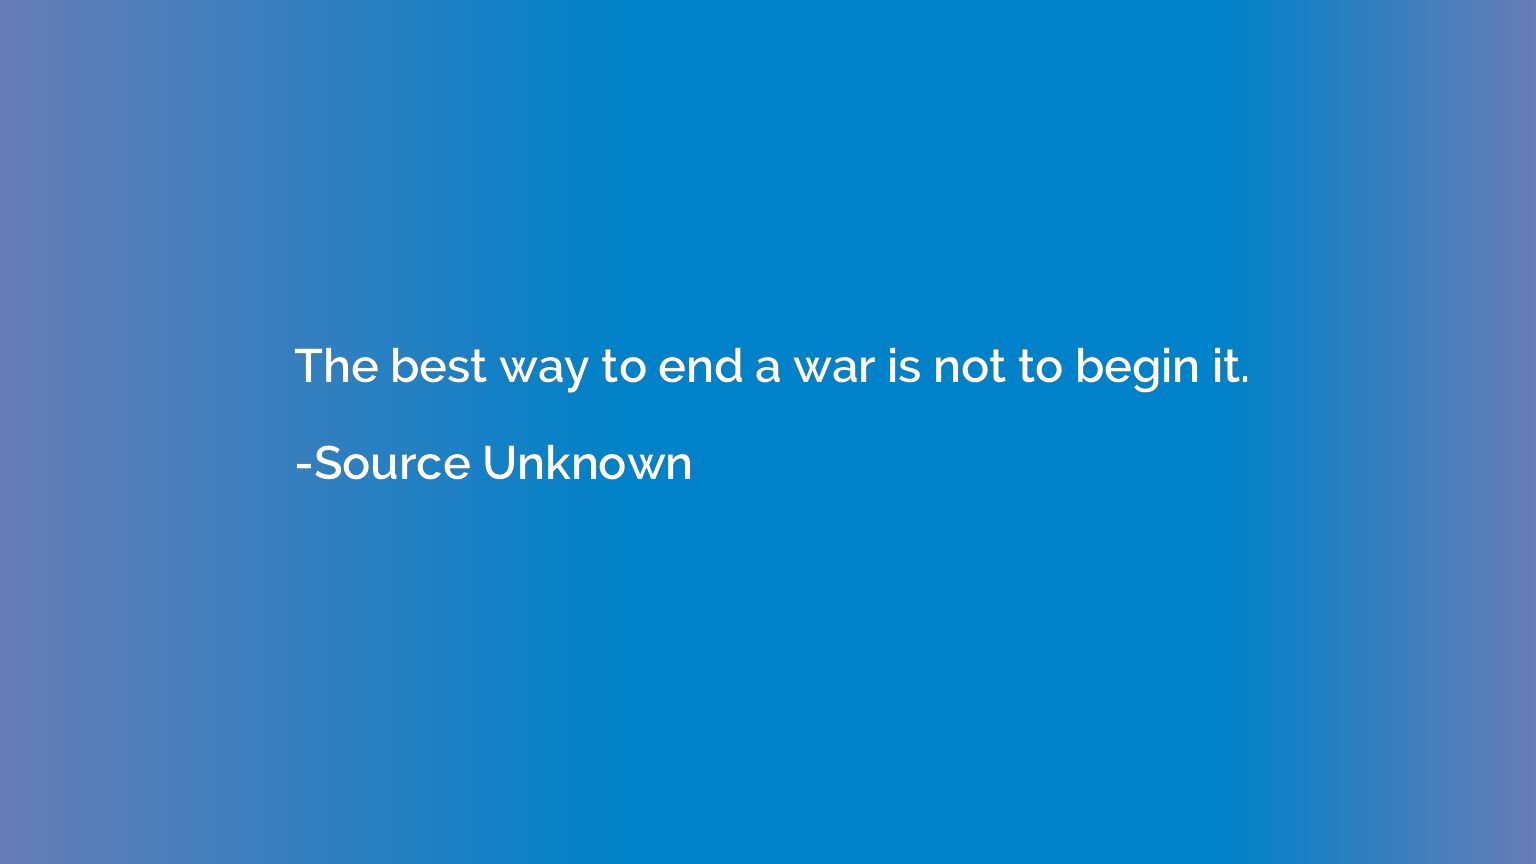 The best way to end a war is not to begin it.